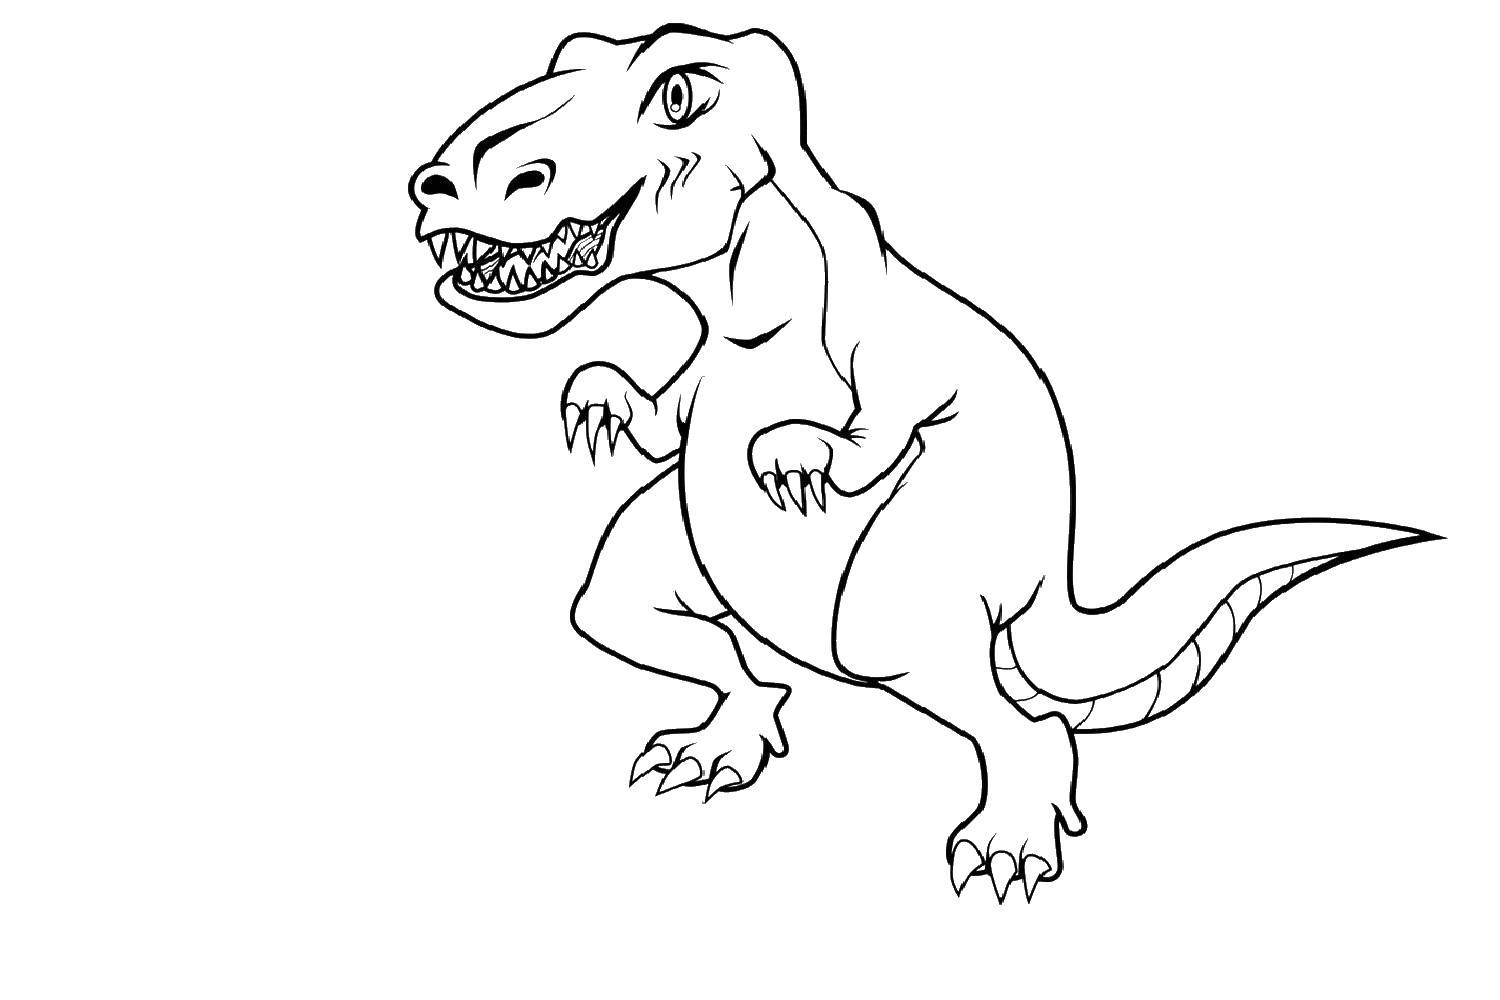 Coloring Rex.. Category Jurassic Park. Tags:  Dinosaurs.